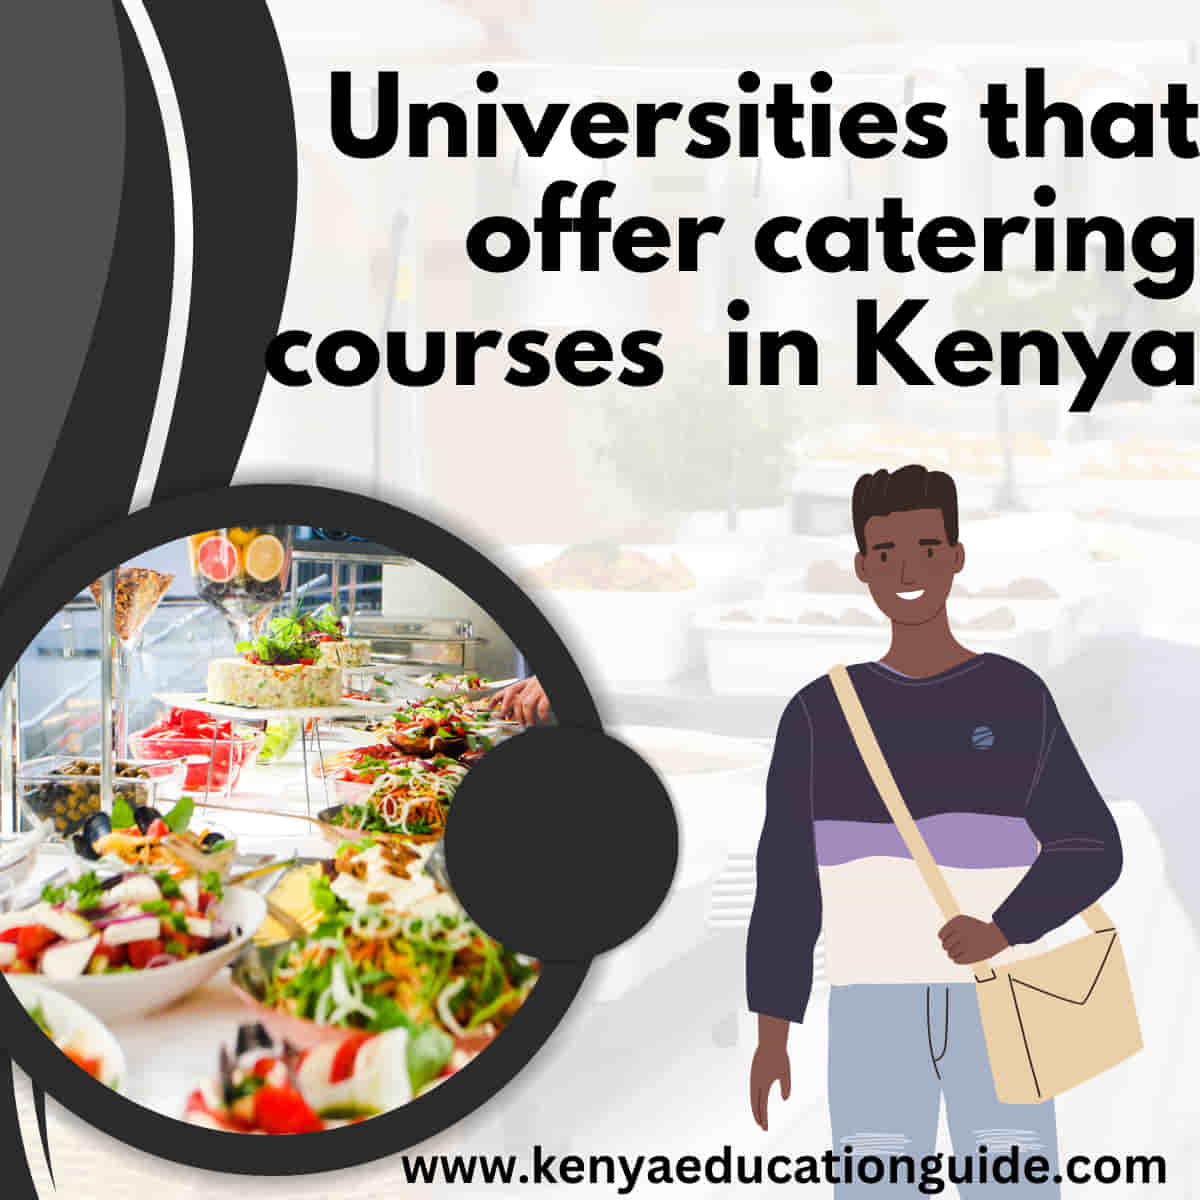 Universities that offer catering courses